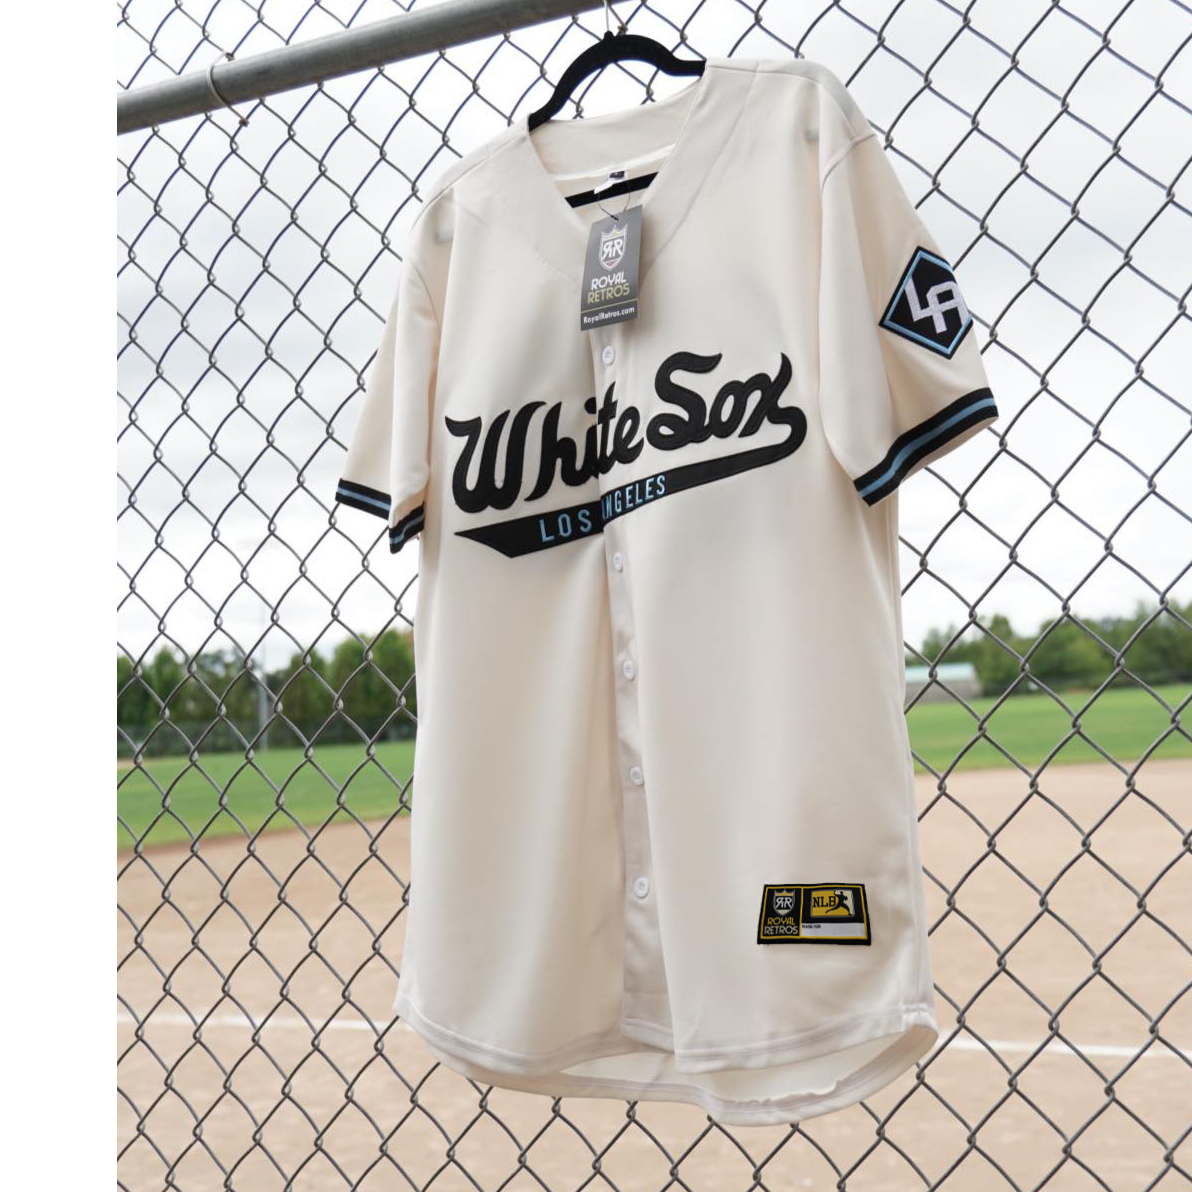 white sox jersey button up